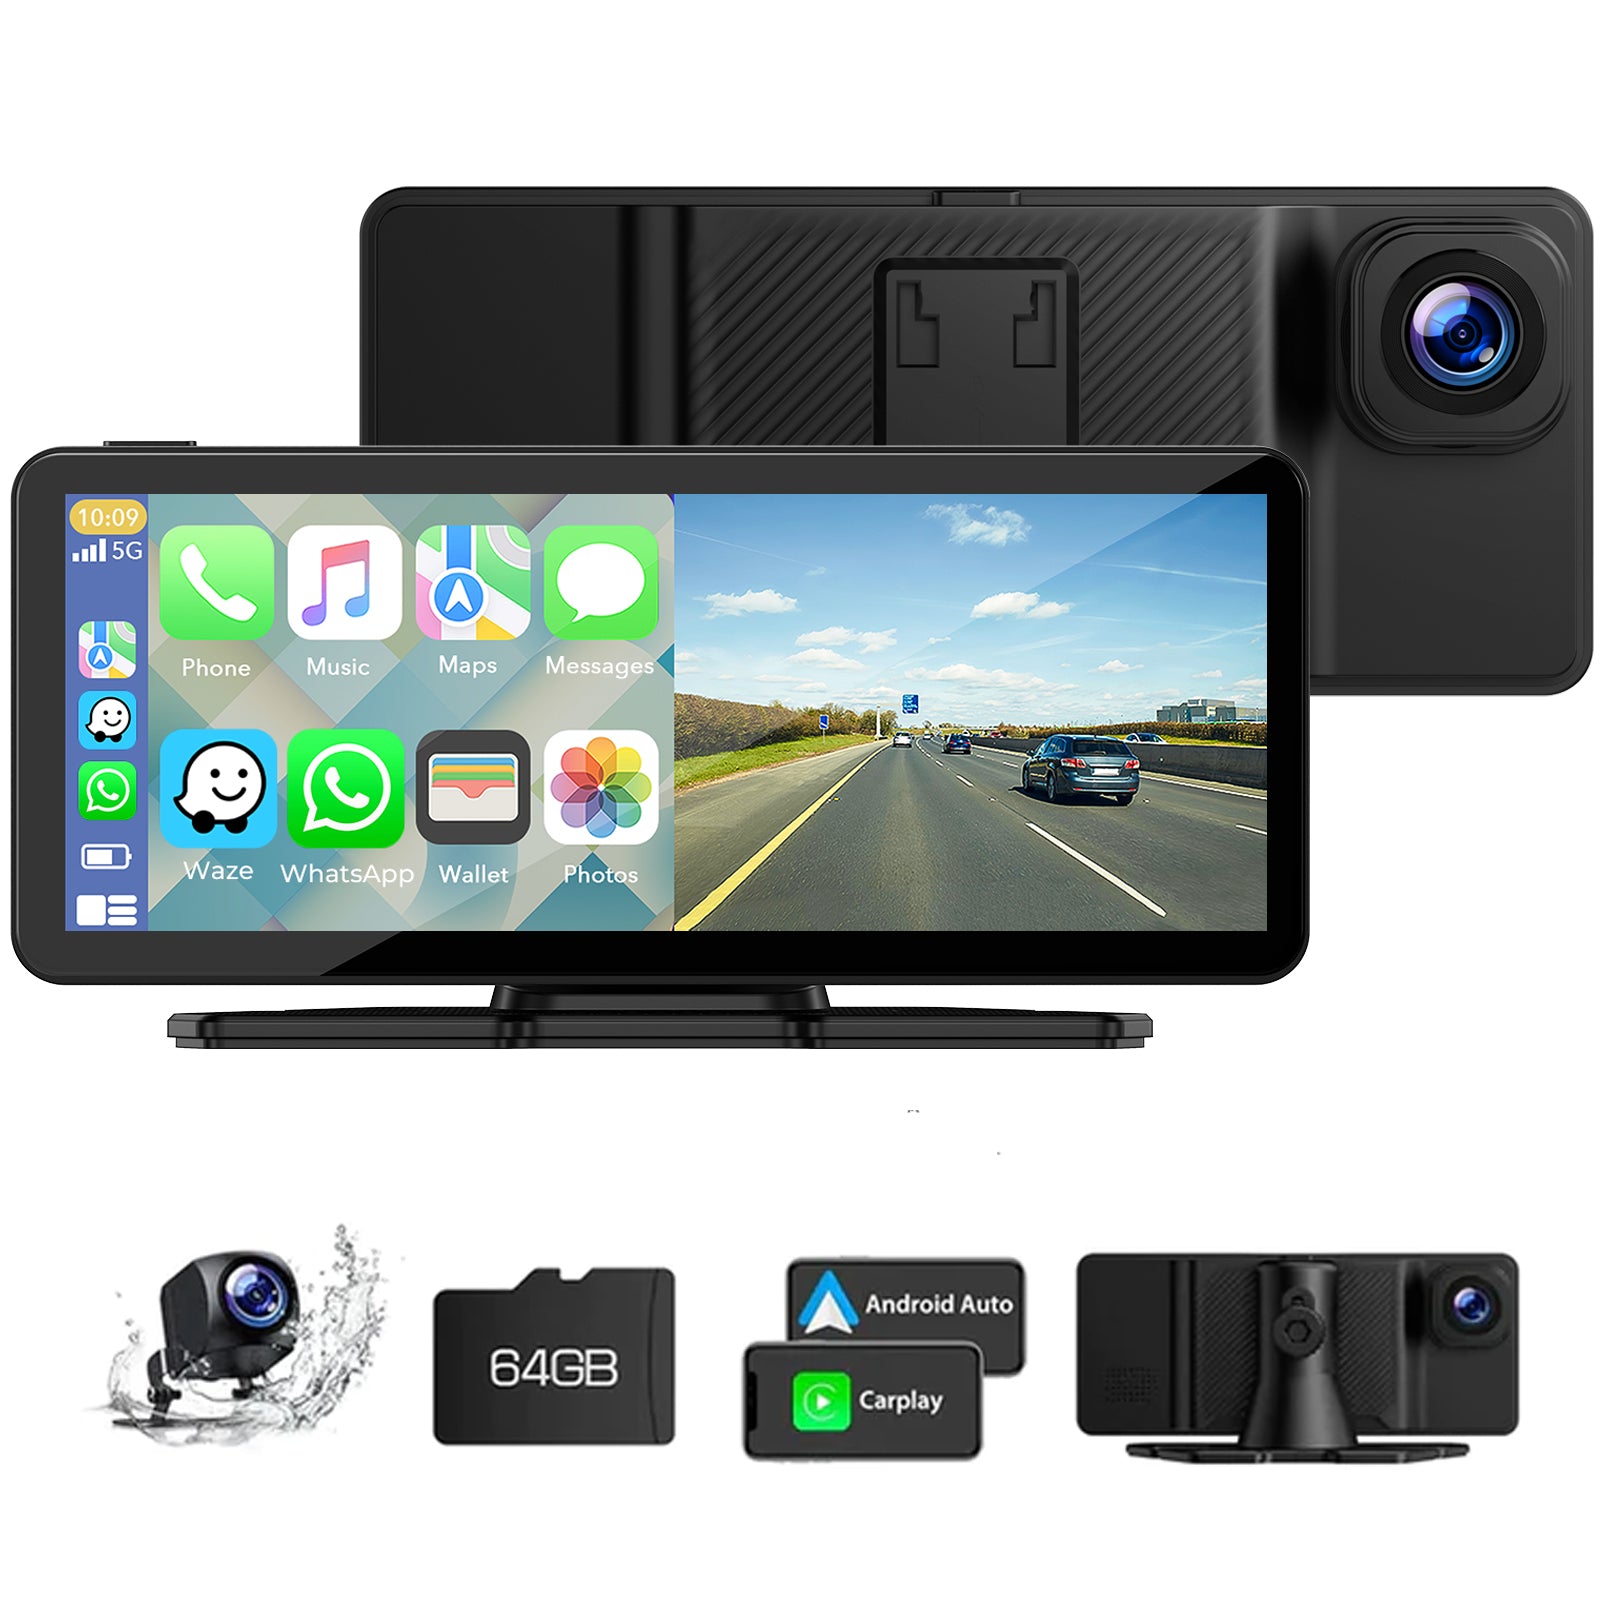 Campark Portable Wireless Car Stereo with Carplay, Front 2.5K + Rear 1080P, Android Auto, GPS, AirPlay, AUX/FM, Comes with a 64GB memory card